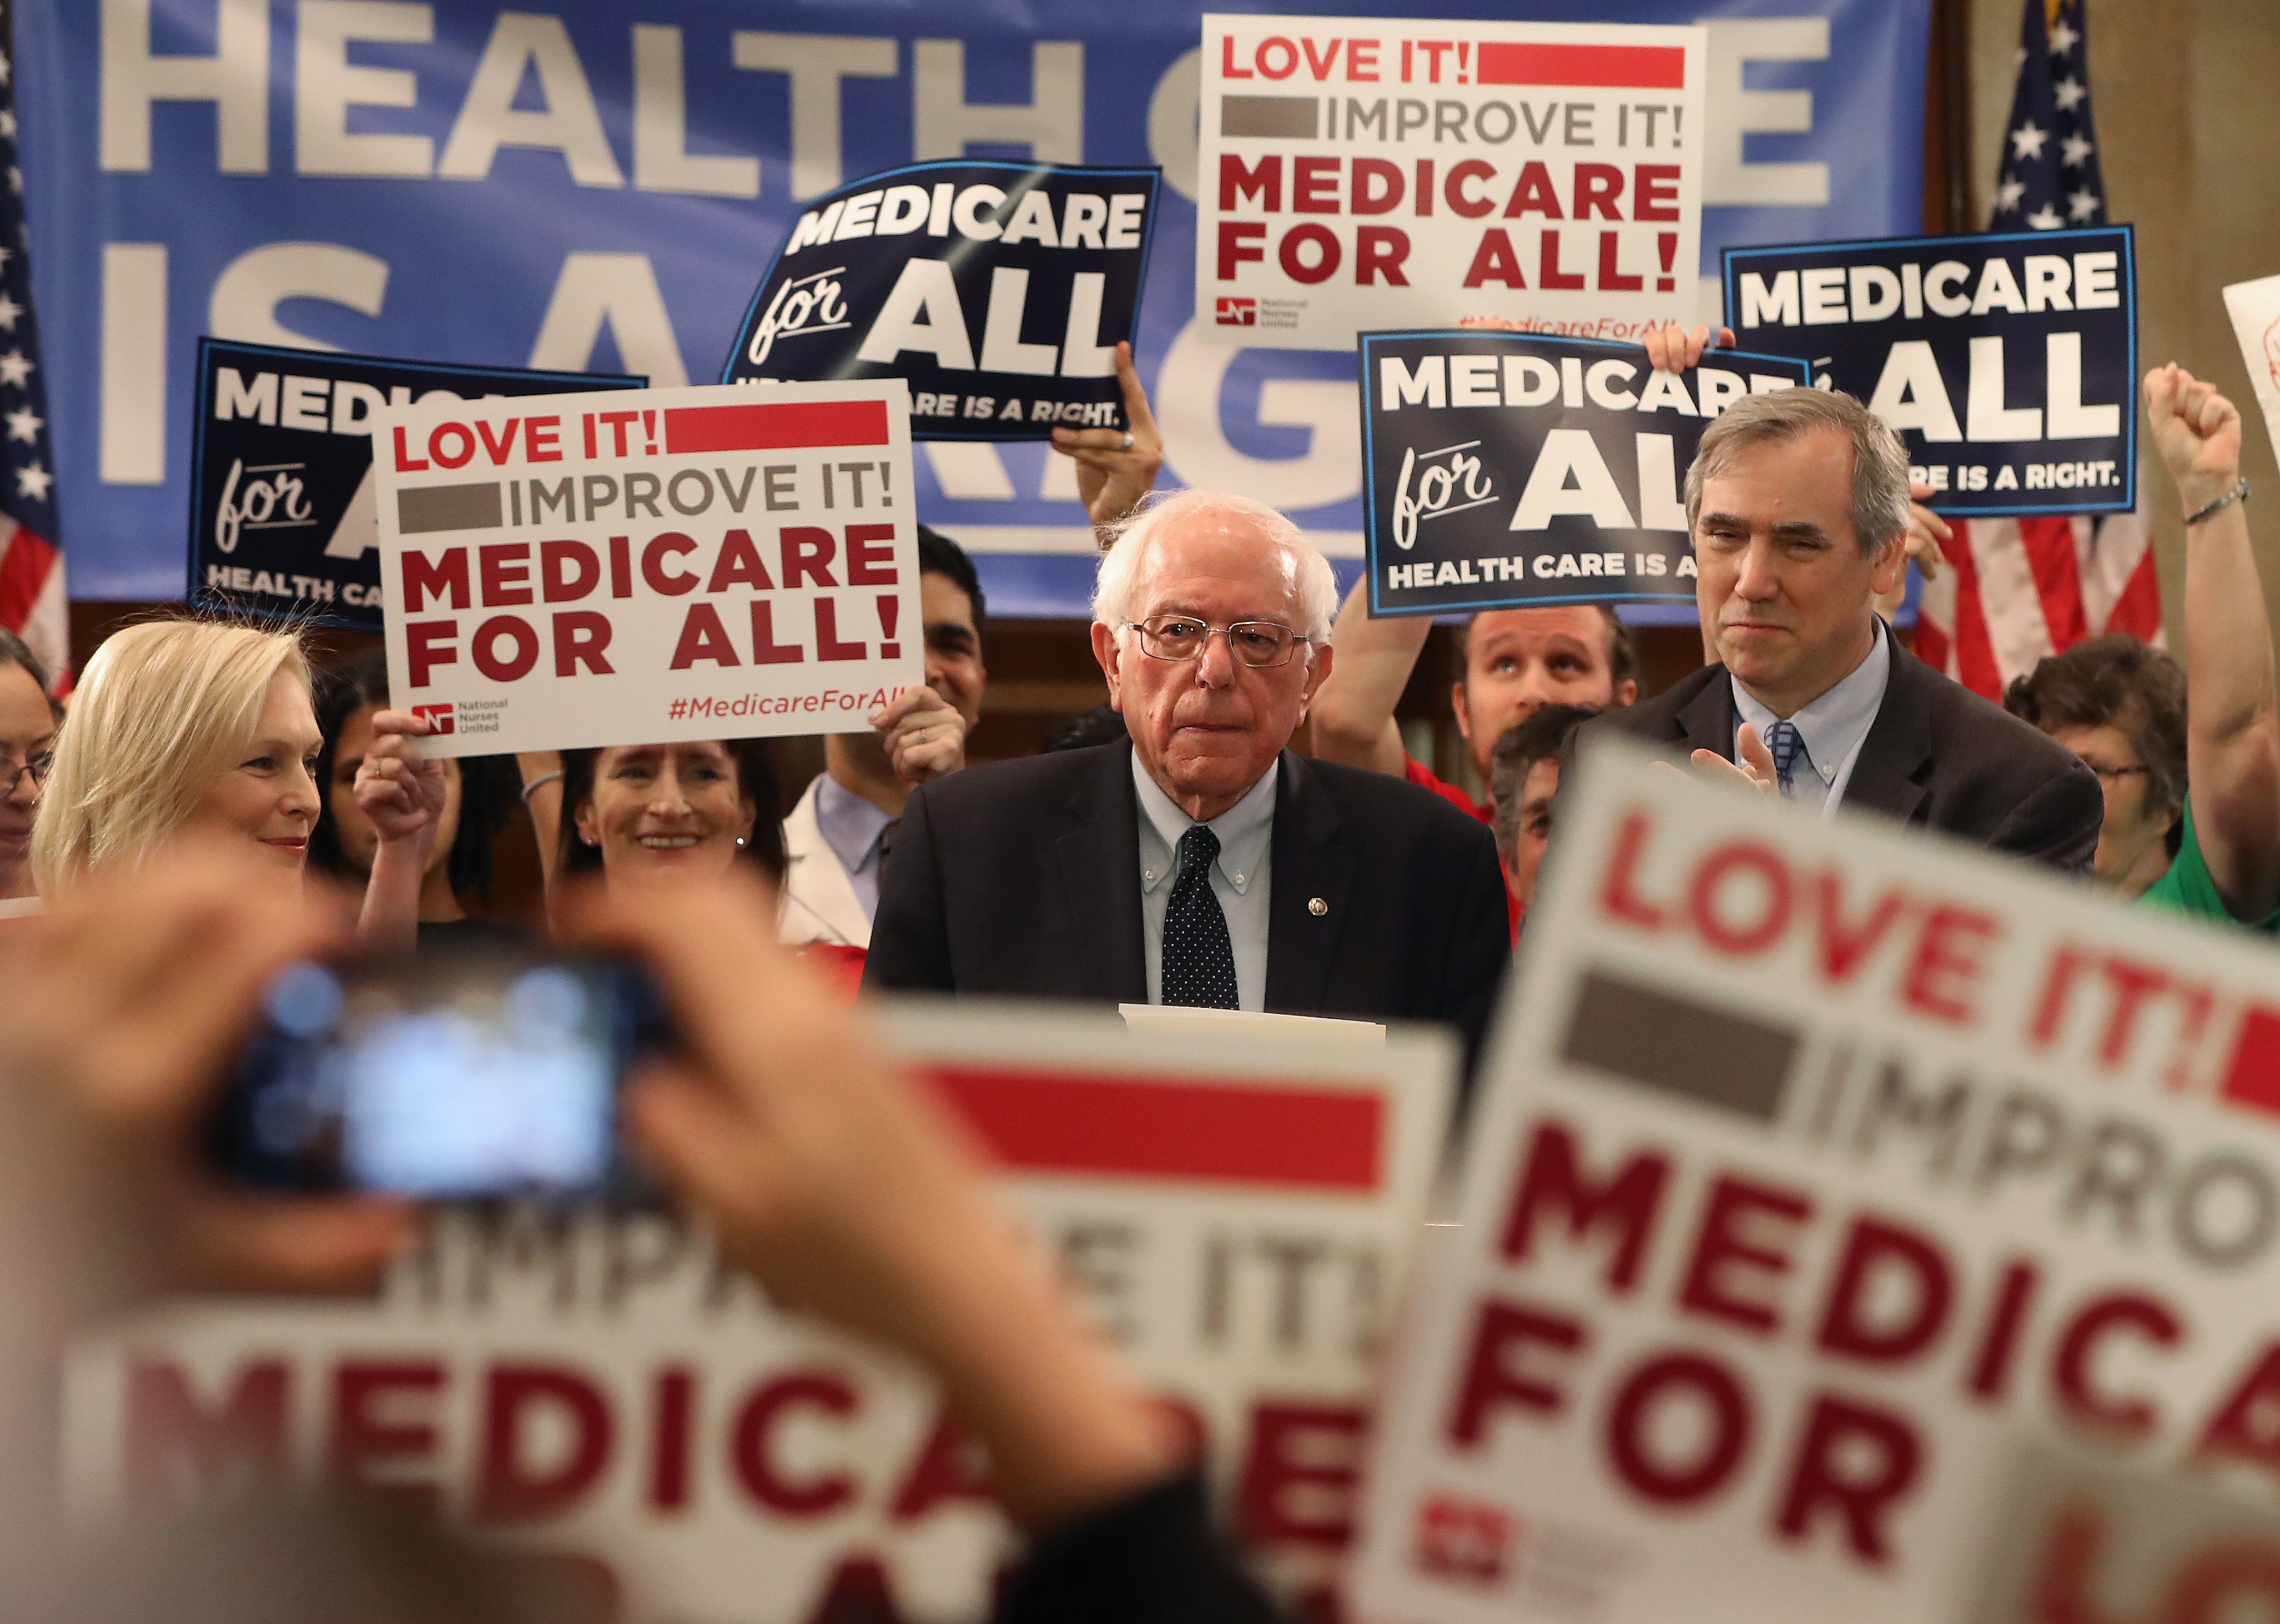 Unsophisticated investors overreact on Medicare for All: Ex-Aetna CEO